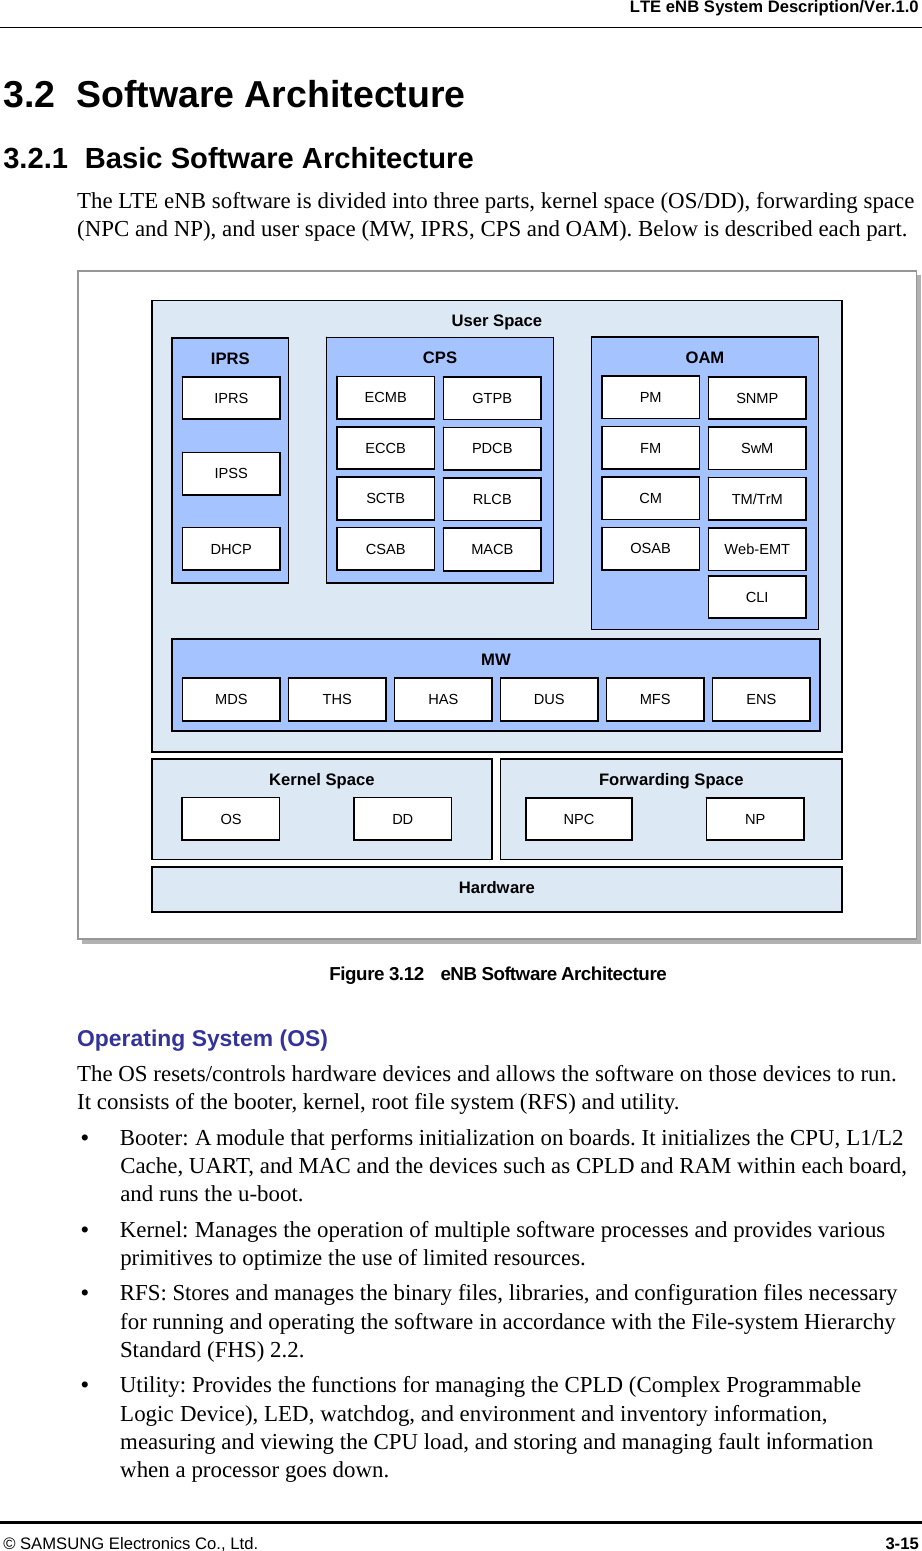  LTE eNB System Description/Ver.1.0 3.2 Software Architecture 3.2.1  Basic Software Architecture The LTE eNB software is divided into three parts, kernel space (OS/DD), forwarding space (NPC and NP), and user space (MW, IPRS, CPS and OAM). Below is described each part.  Hardware Forwarding Space NPC  NP IPRS IPRS IPSS DHCP CPS ECMB ECCB SCTB CSAB GTPB PDCB RLCB MACB TM/TrM SwM SNMP OSAB CLI Web-EMT ENS MFS DUS MW MDS  THS  HAS Kernel Space OS  DD DHCP CM FM PM OAM User Space Figure 3.12    eNB Software Architecture  Operating System (OS) The OS resets/controls hardware devices and allows the software on those devices to run. It consists of the booter, kernel, root file system (RFS) and utility.  Booter: A module that performs initialization on boards. It initializes the CPU, L1/L2 Cache, UART, and MAC and the devices such as CPLD and RAM within each board, and runs the u-boot.  Kernel: Manages the operation of multiple software processes and provides various primitives to optimize the use of limited resources.  RFS: Stores and manages the binary files, libraries, and configuration files necessary for running and operating the software in accordance with the File-system Hierarchy Standard (FHS) 2.2.  Utility: Provides the functions for managing the CPLD (Complex Programmable Logic Device), LED, watchdog, and environment and inventory information, measuring and viewing the CPU load, and storing and managing fault information when a processor goes down. © SAMSUNG Electronics Co., Ltd.  3-15 